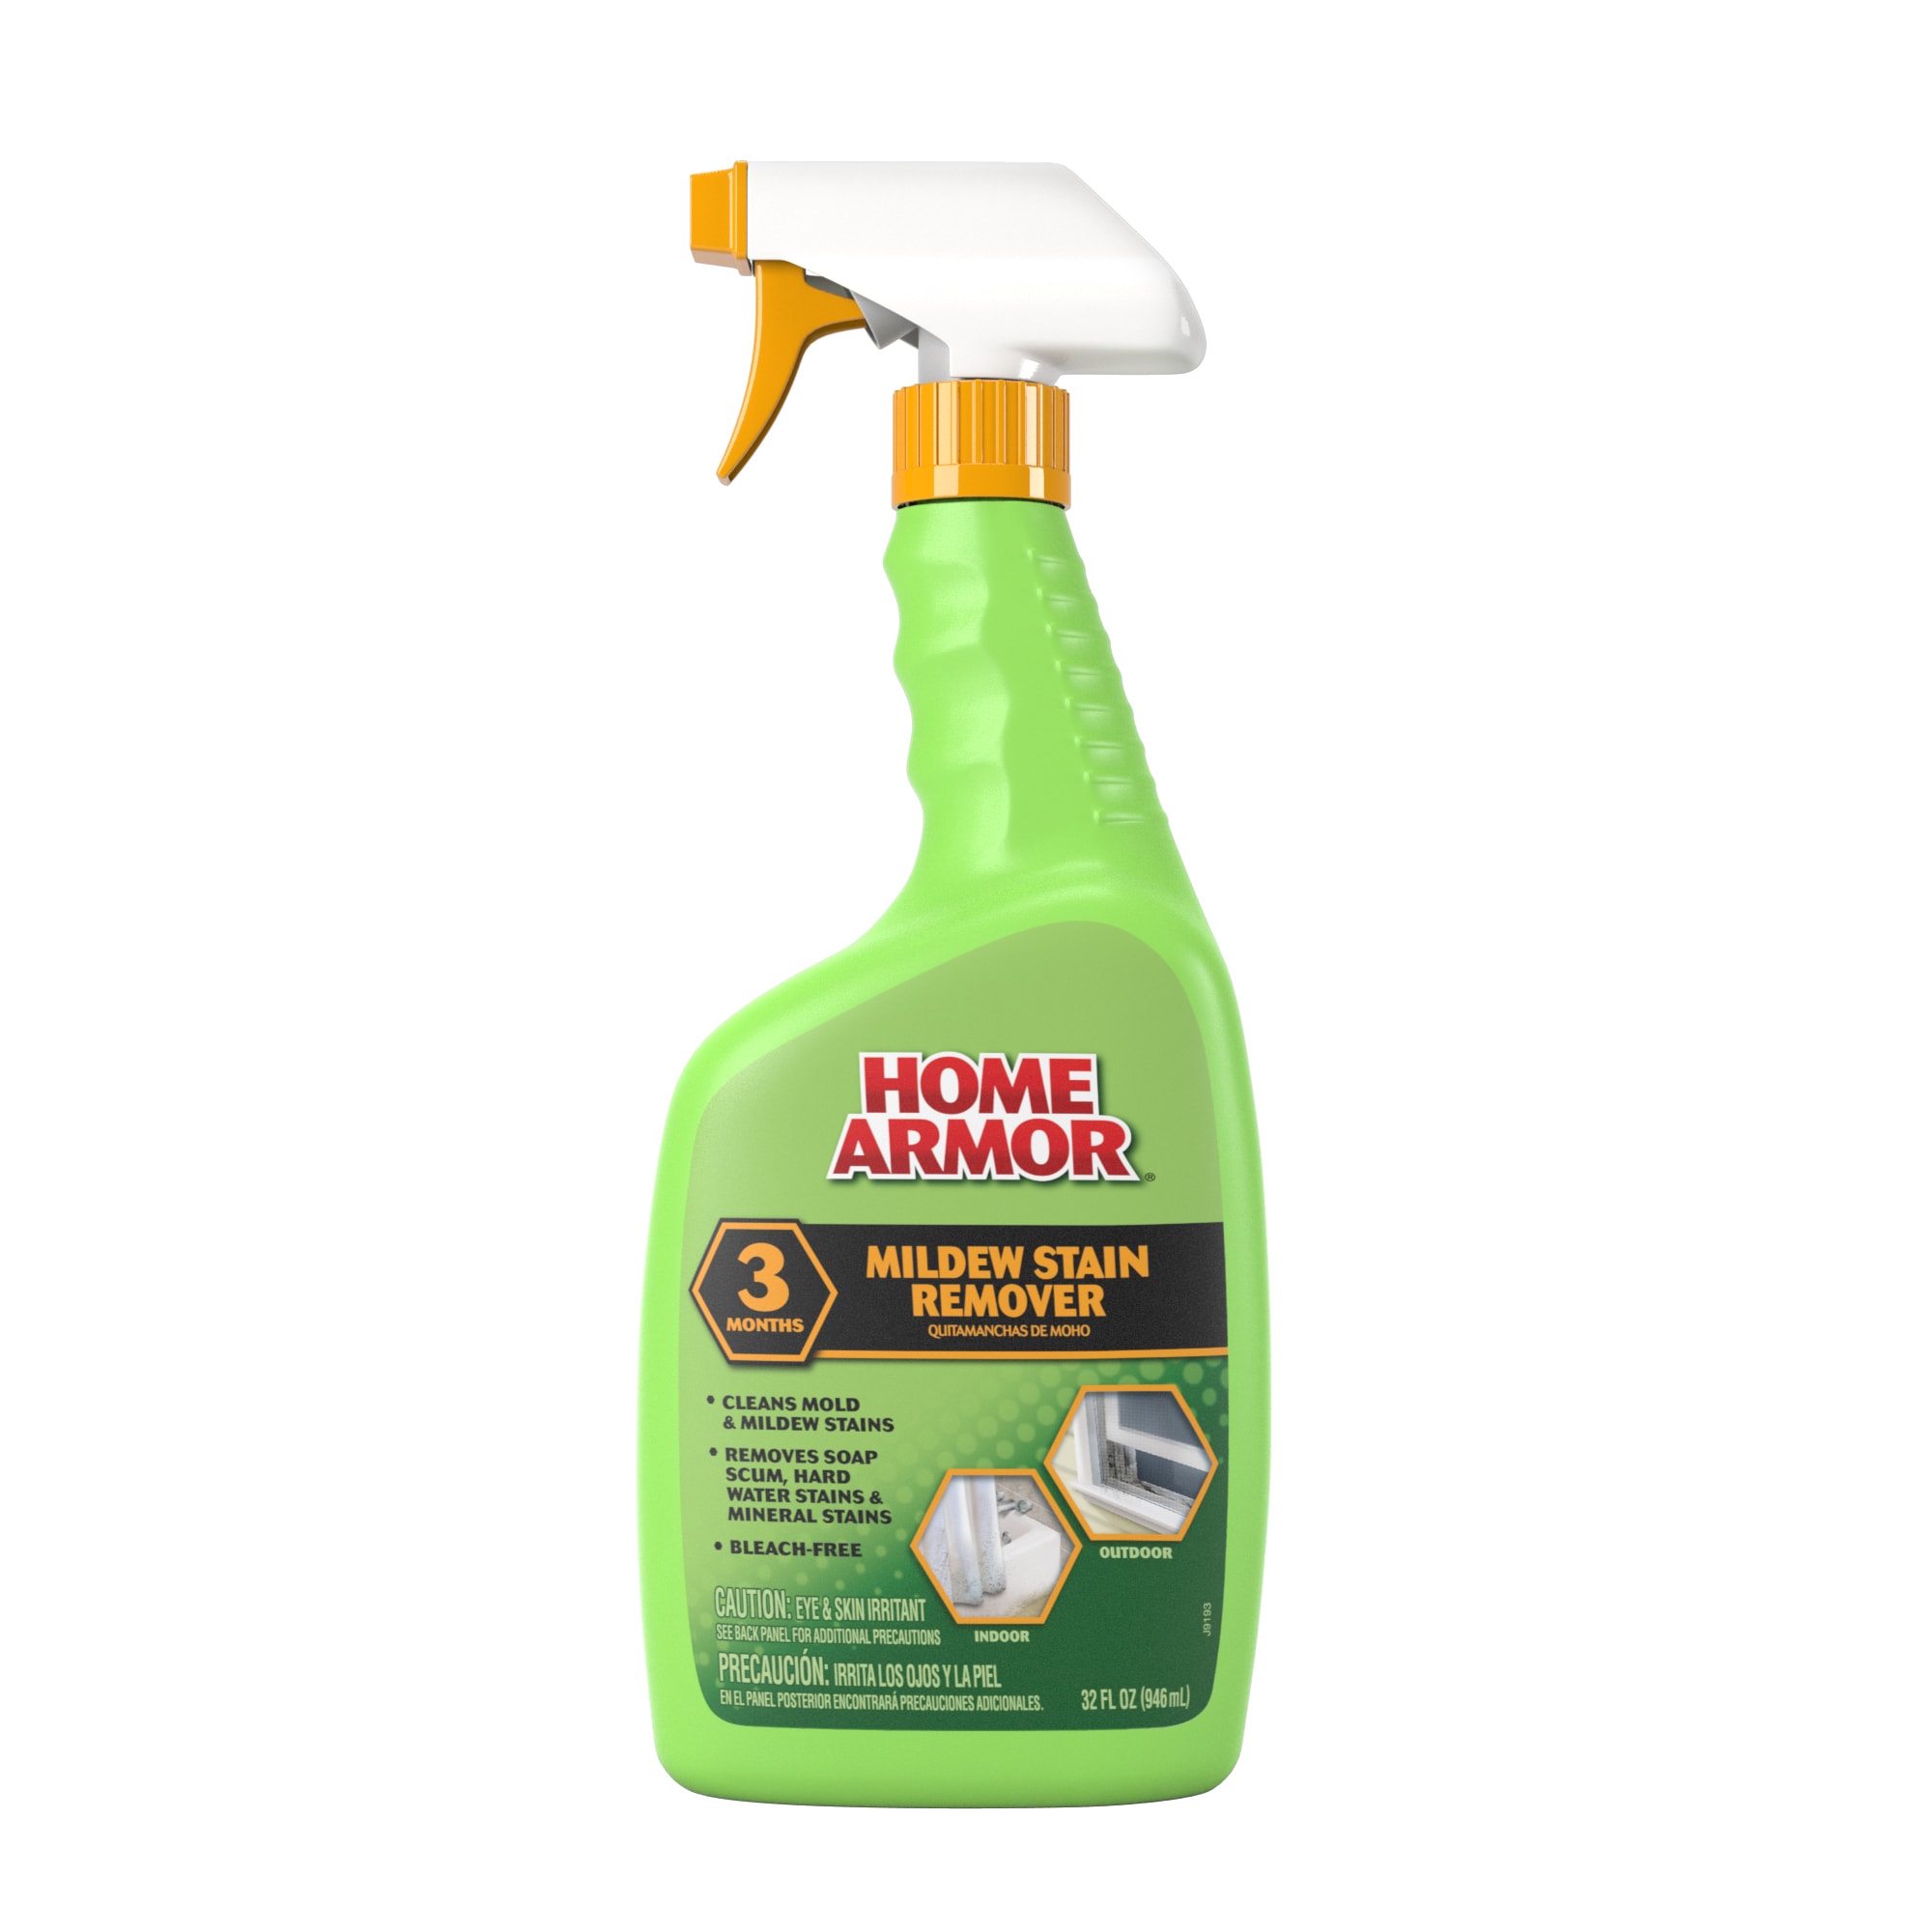 Marine 31 Mildew Stain Remover & Cleaner - Marine & Boat, Home & Patio, Bathroom & Shower Cleaner